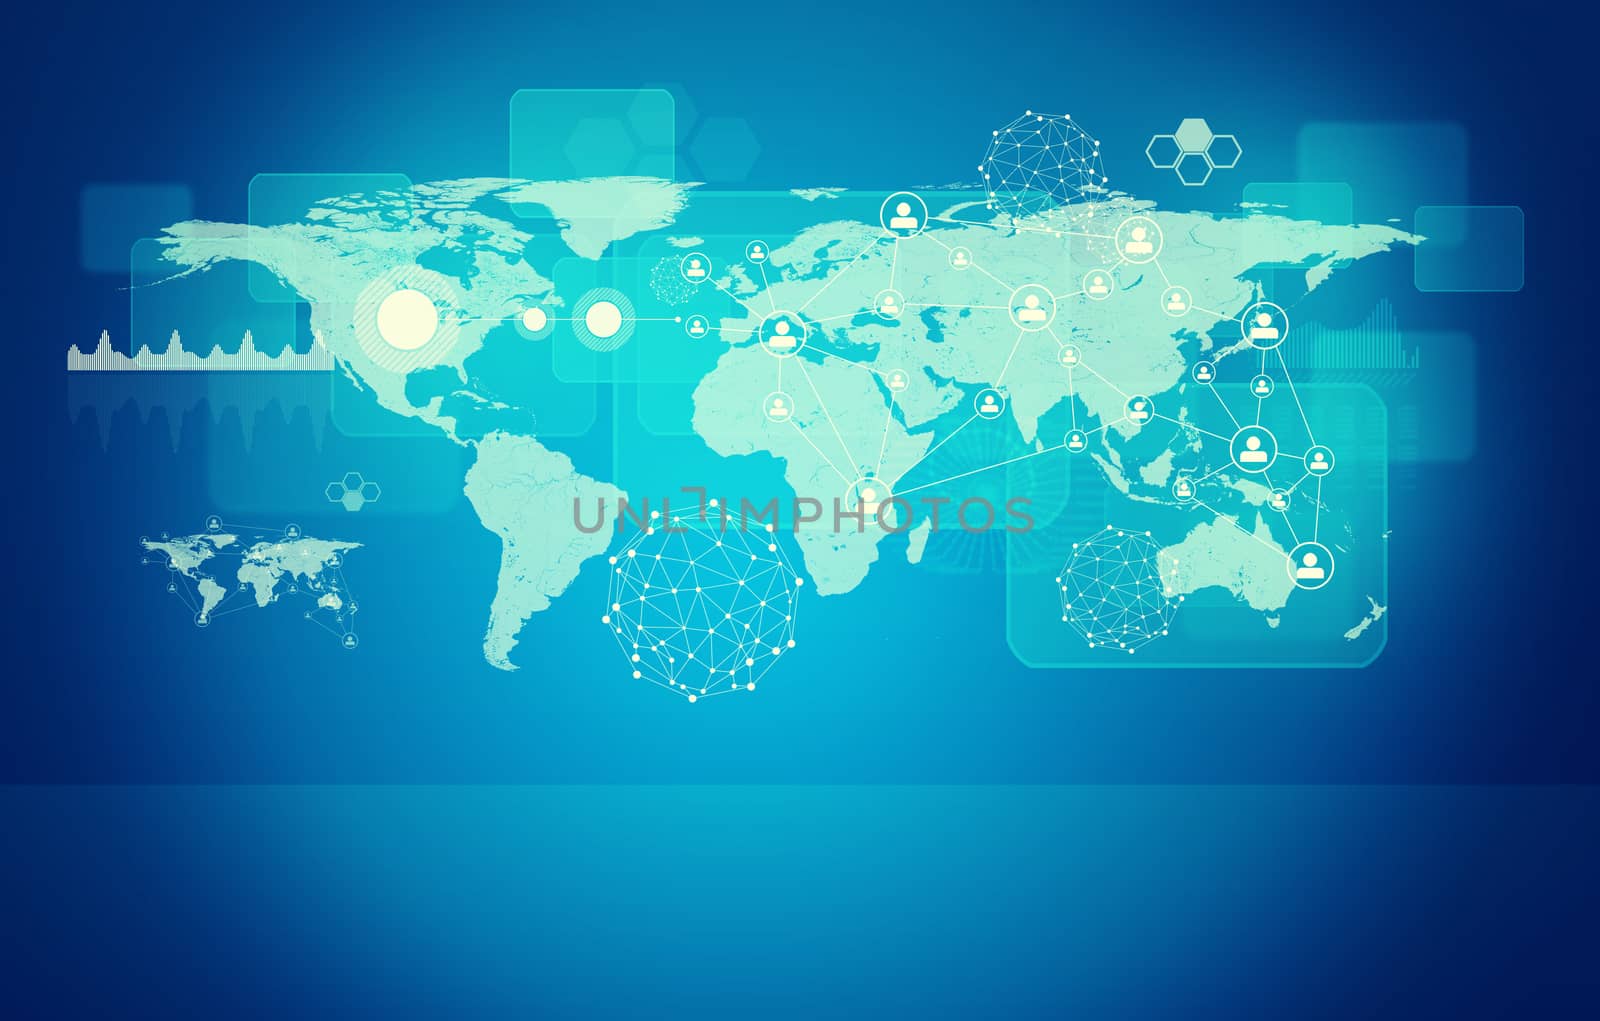 Abstract blue background with world map, graphical charts, molecule model 